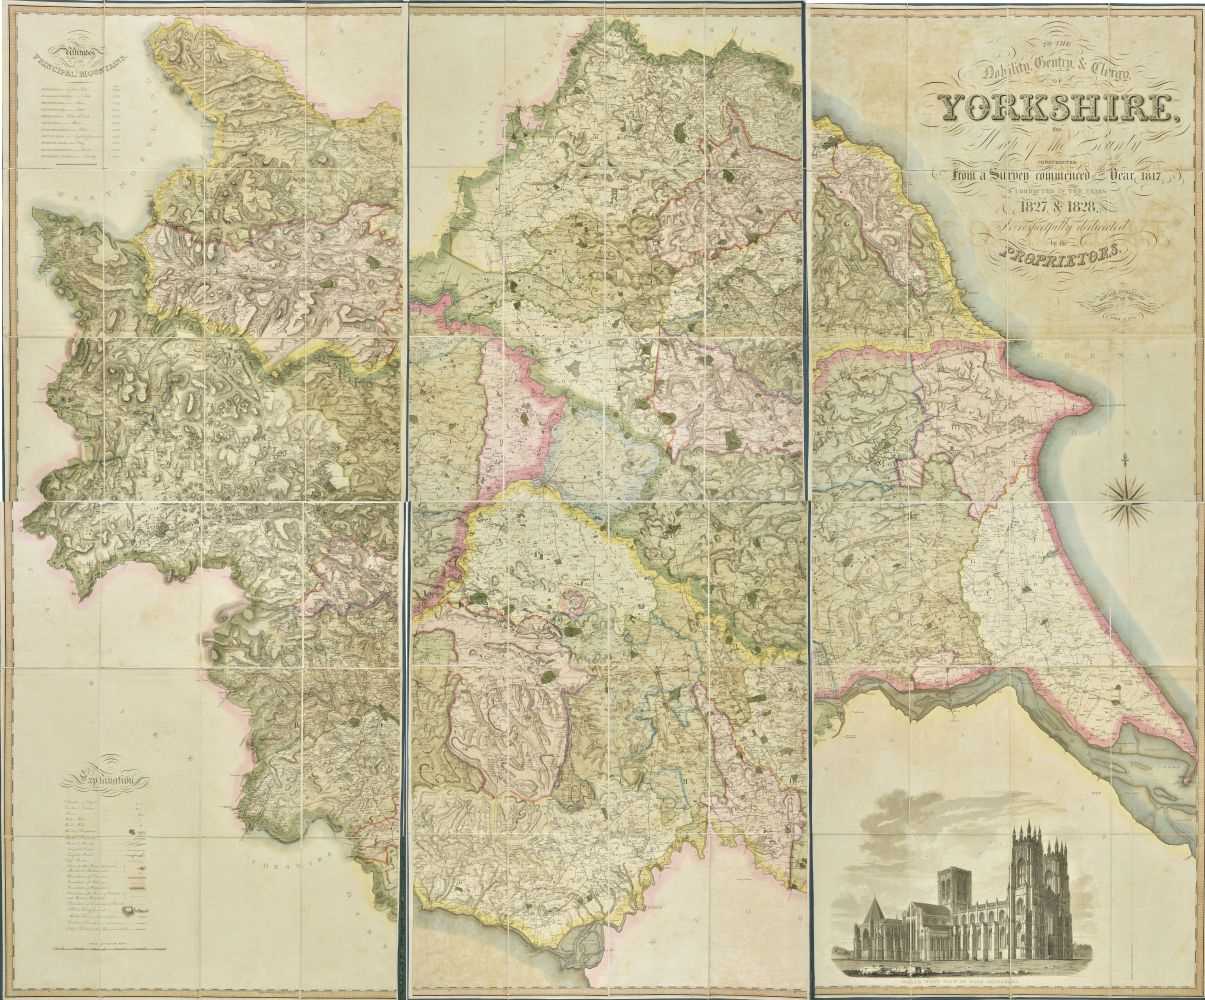 Lot 137 - Yorkshire. Teesdale (Henry & Stocking C.), Large scale map of Yorkshire, 1828